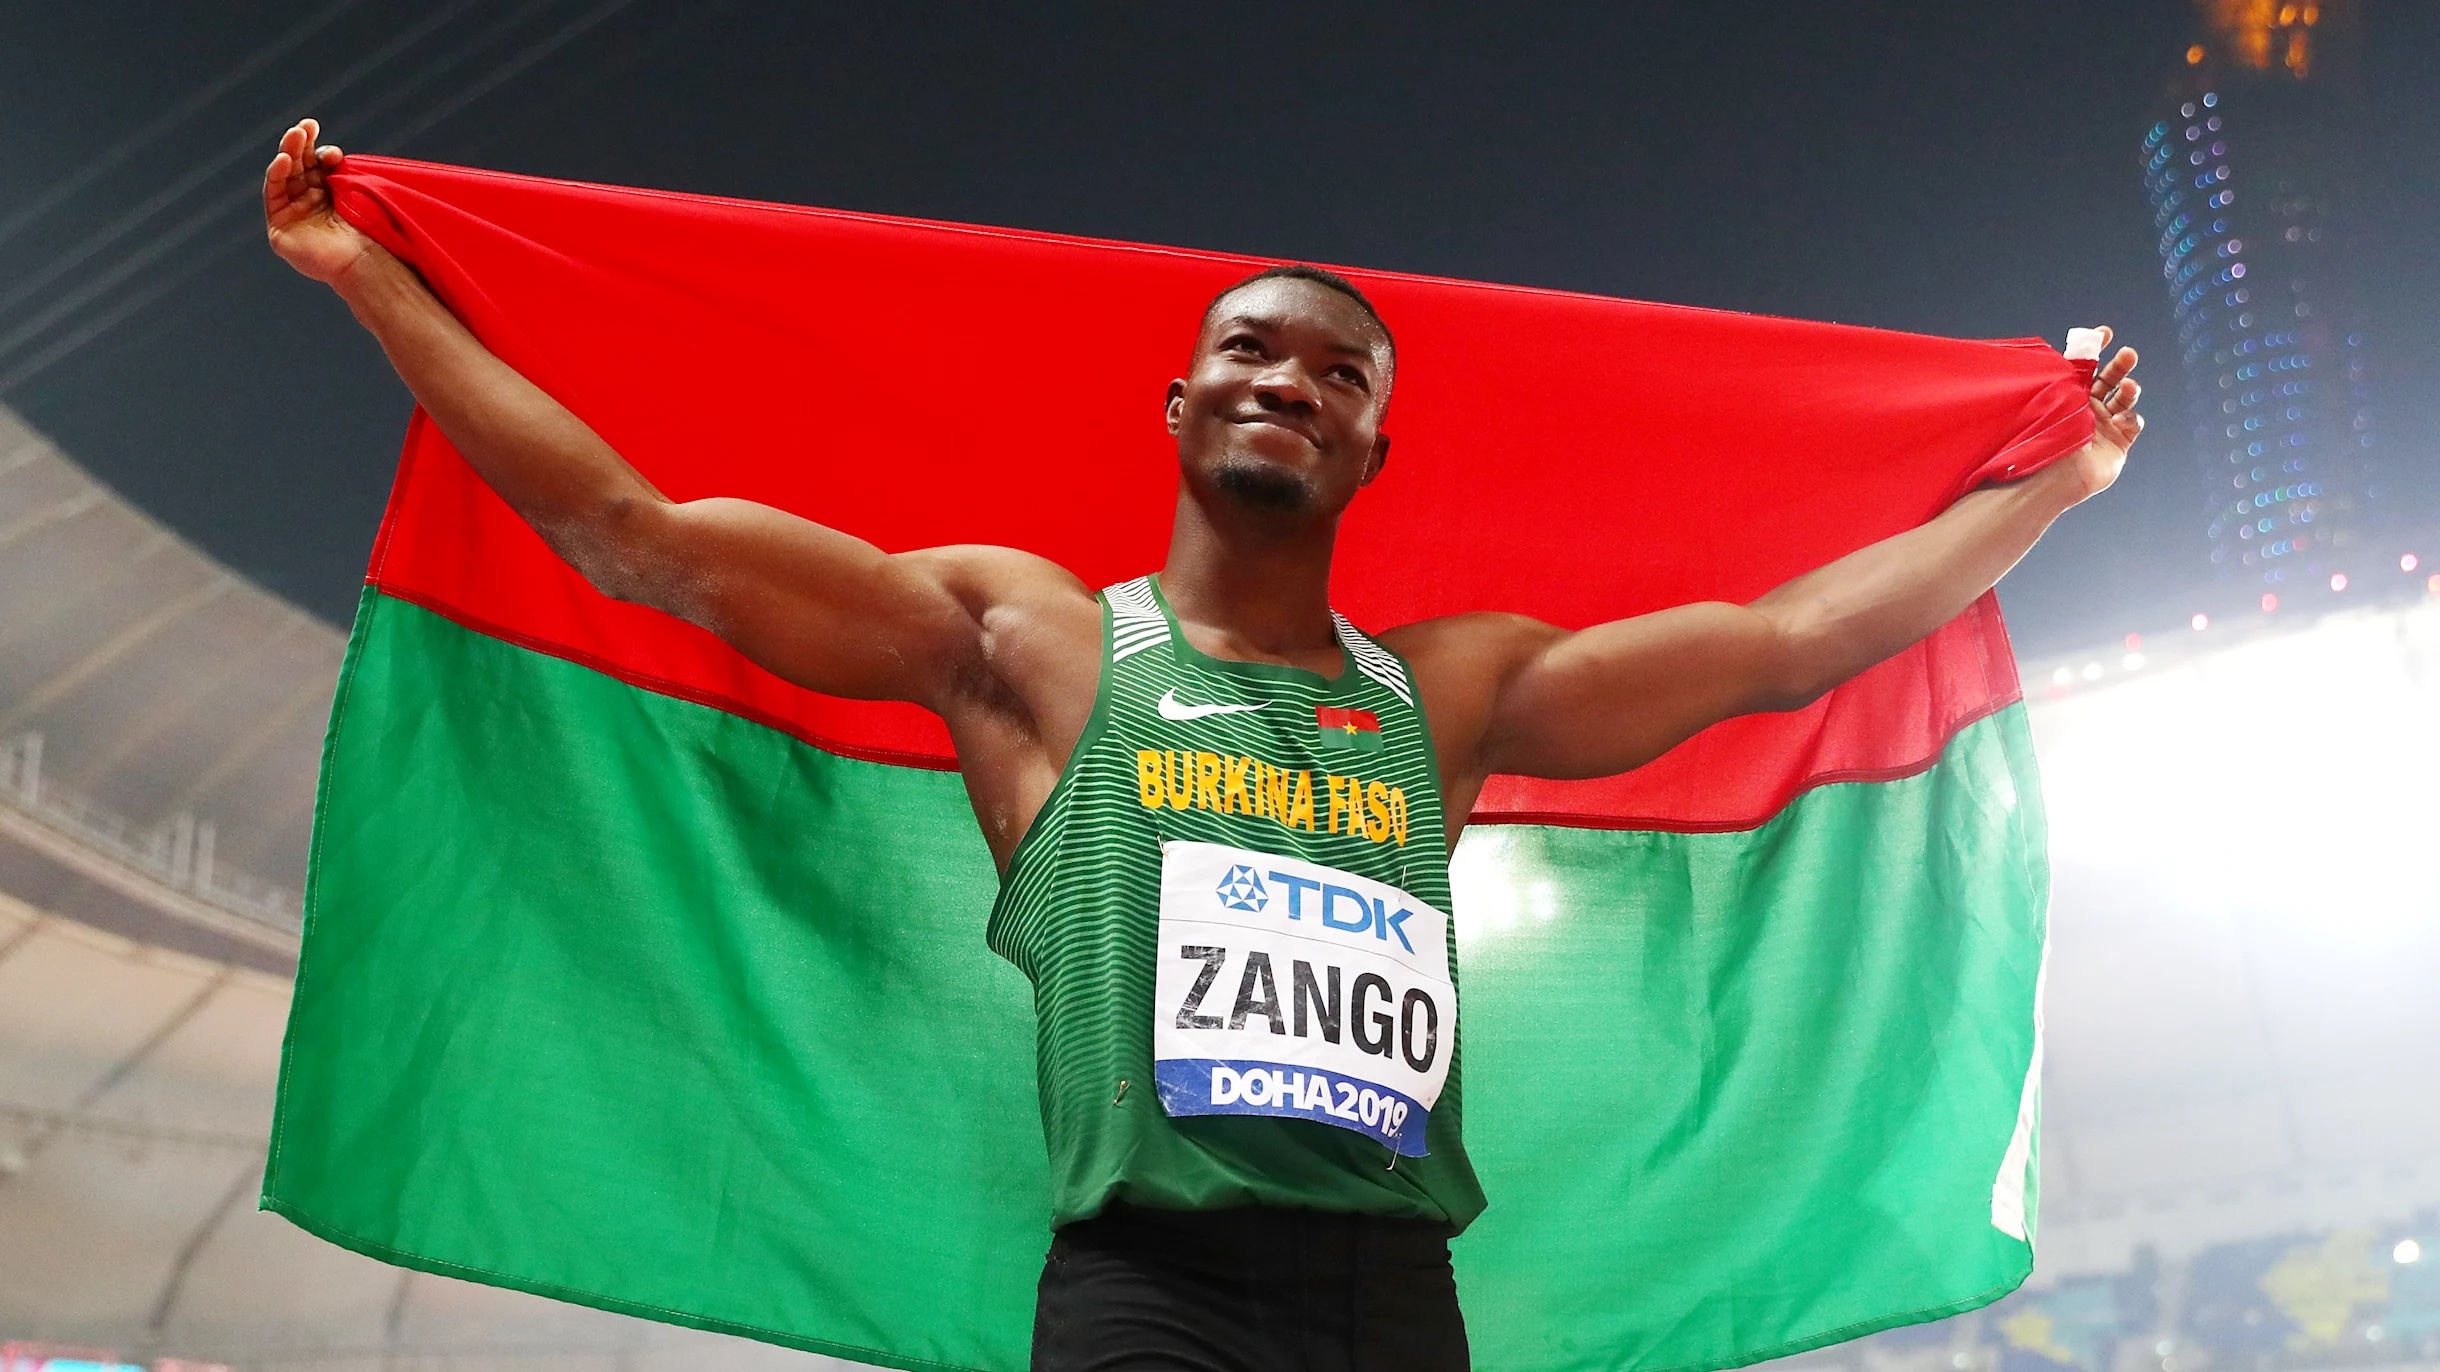 Hugues Fabrice Zango won the gold medal in the triple jump in Budapest